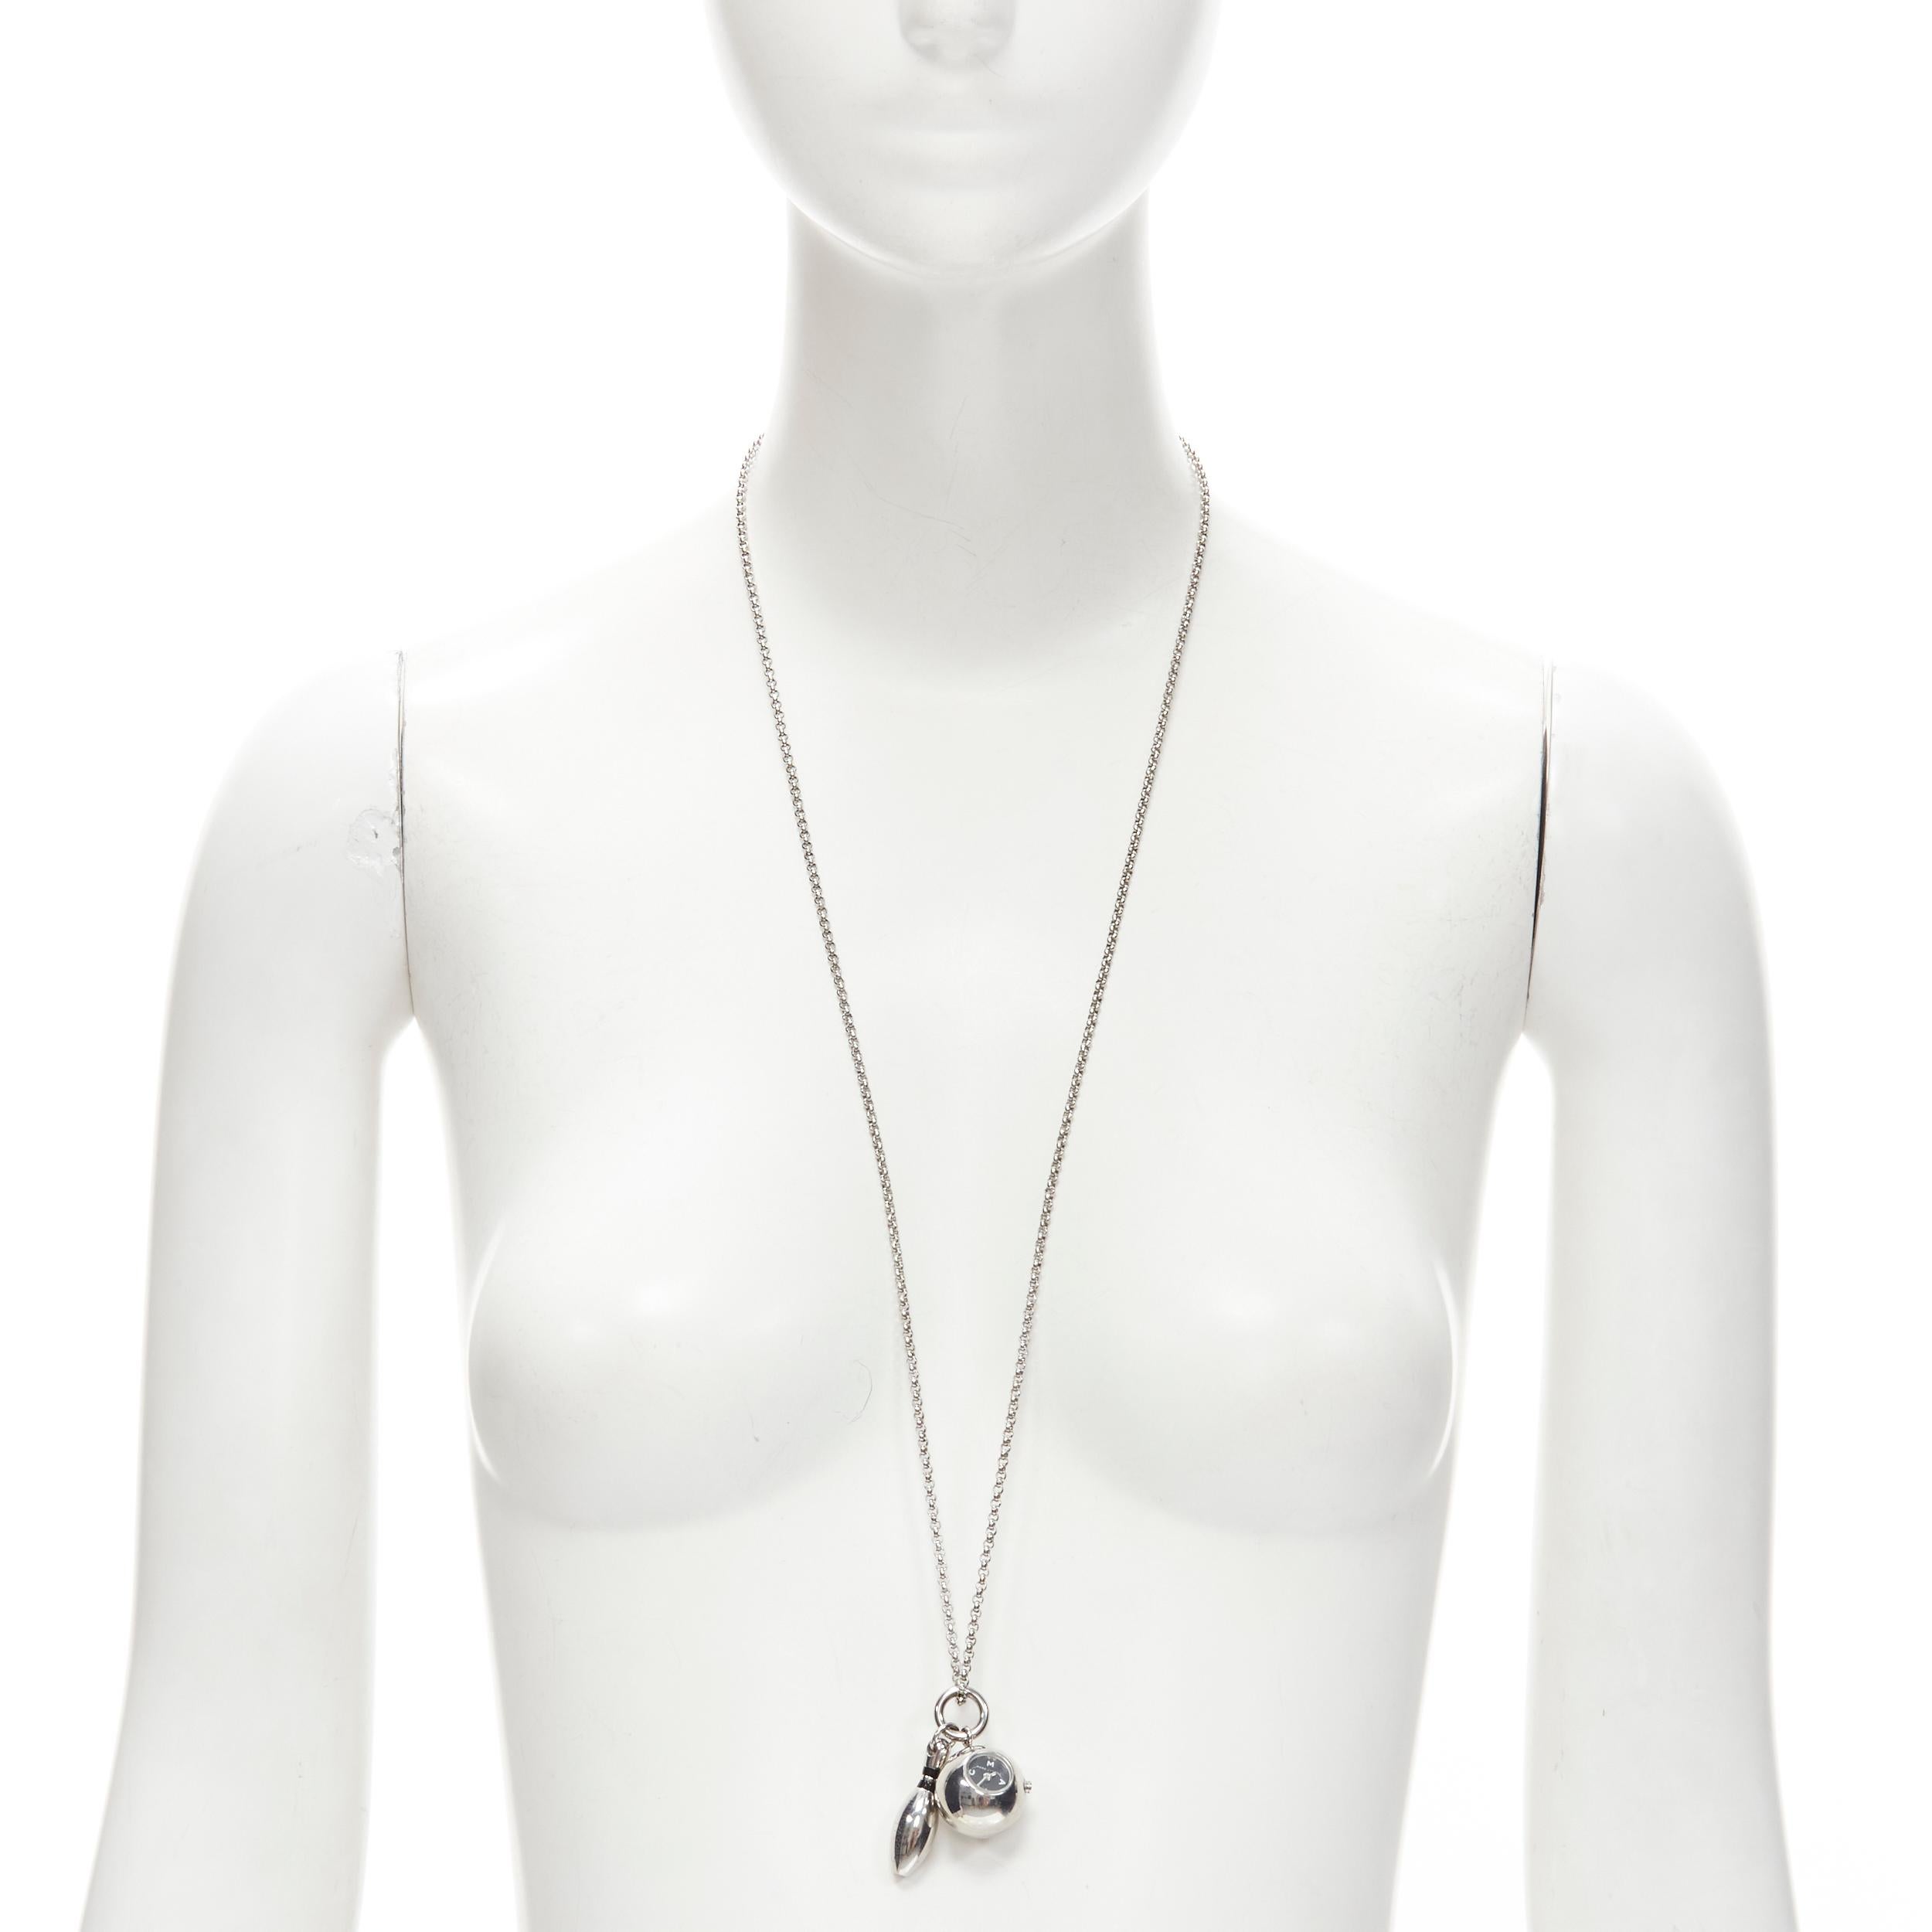 MARC JACOBS silver-tone bowling pin ball watch chain long necklace
Reference: ANWU/A00283
Brand: Marc Jacobs
Material: Metal
Color: Silver, Black
Pattern: Solid
Closure: Push Clasp

CONDITION:
Condition: Very good, this item was pre-owned and is in